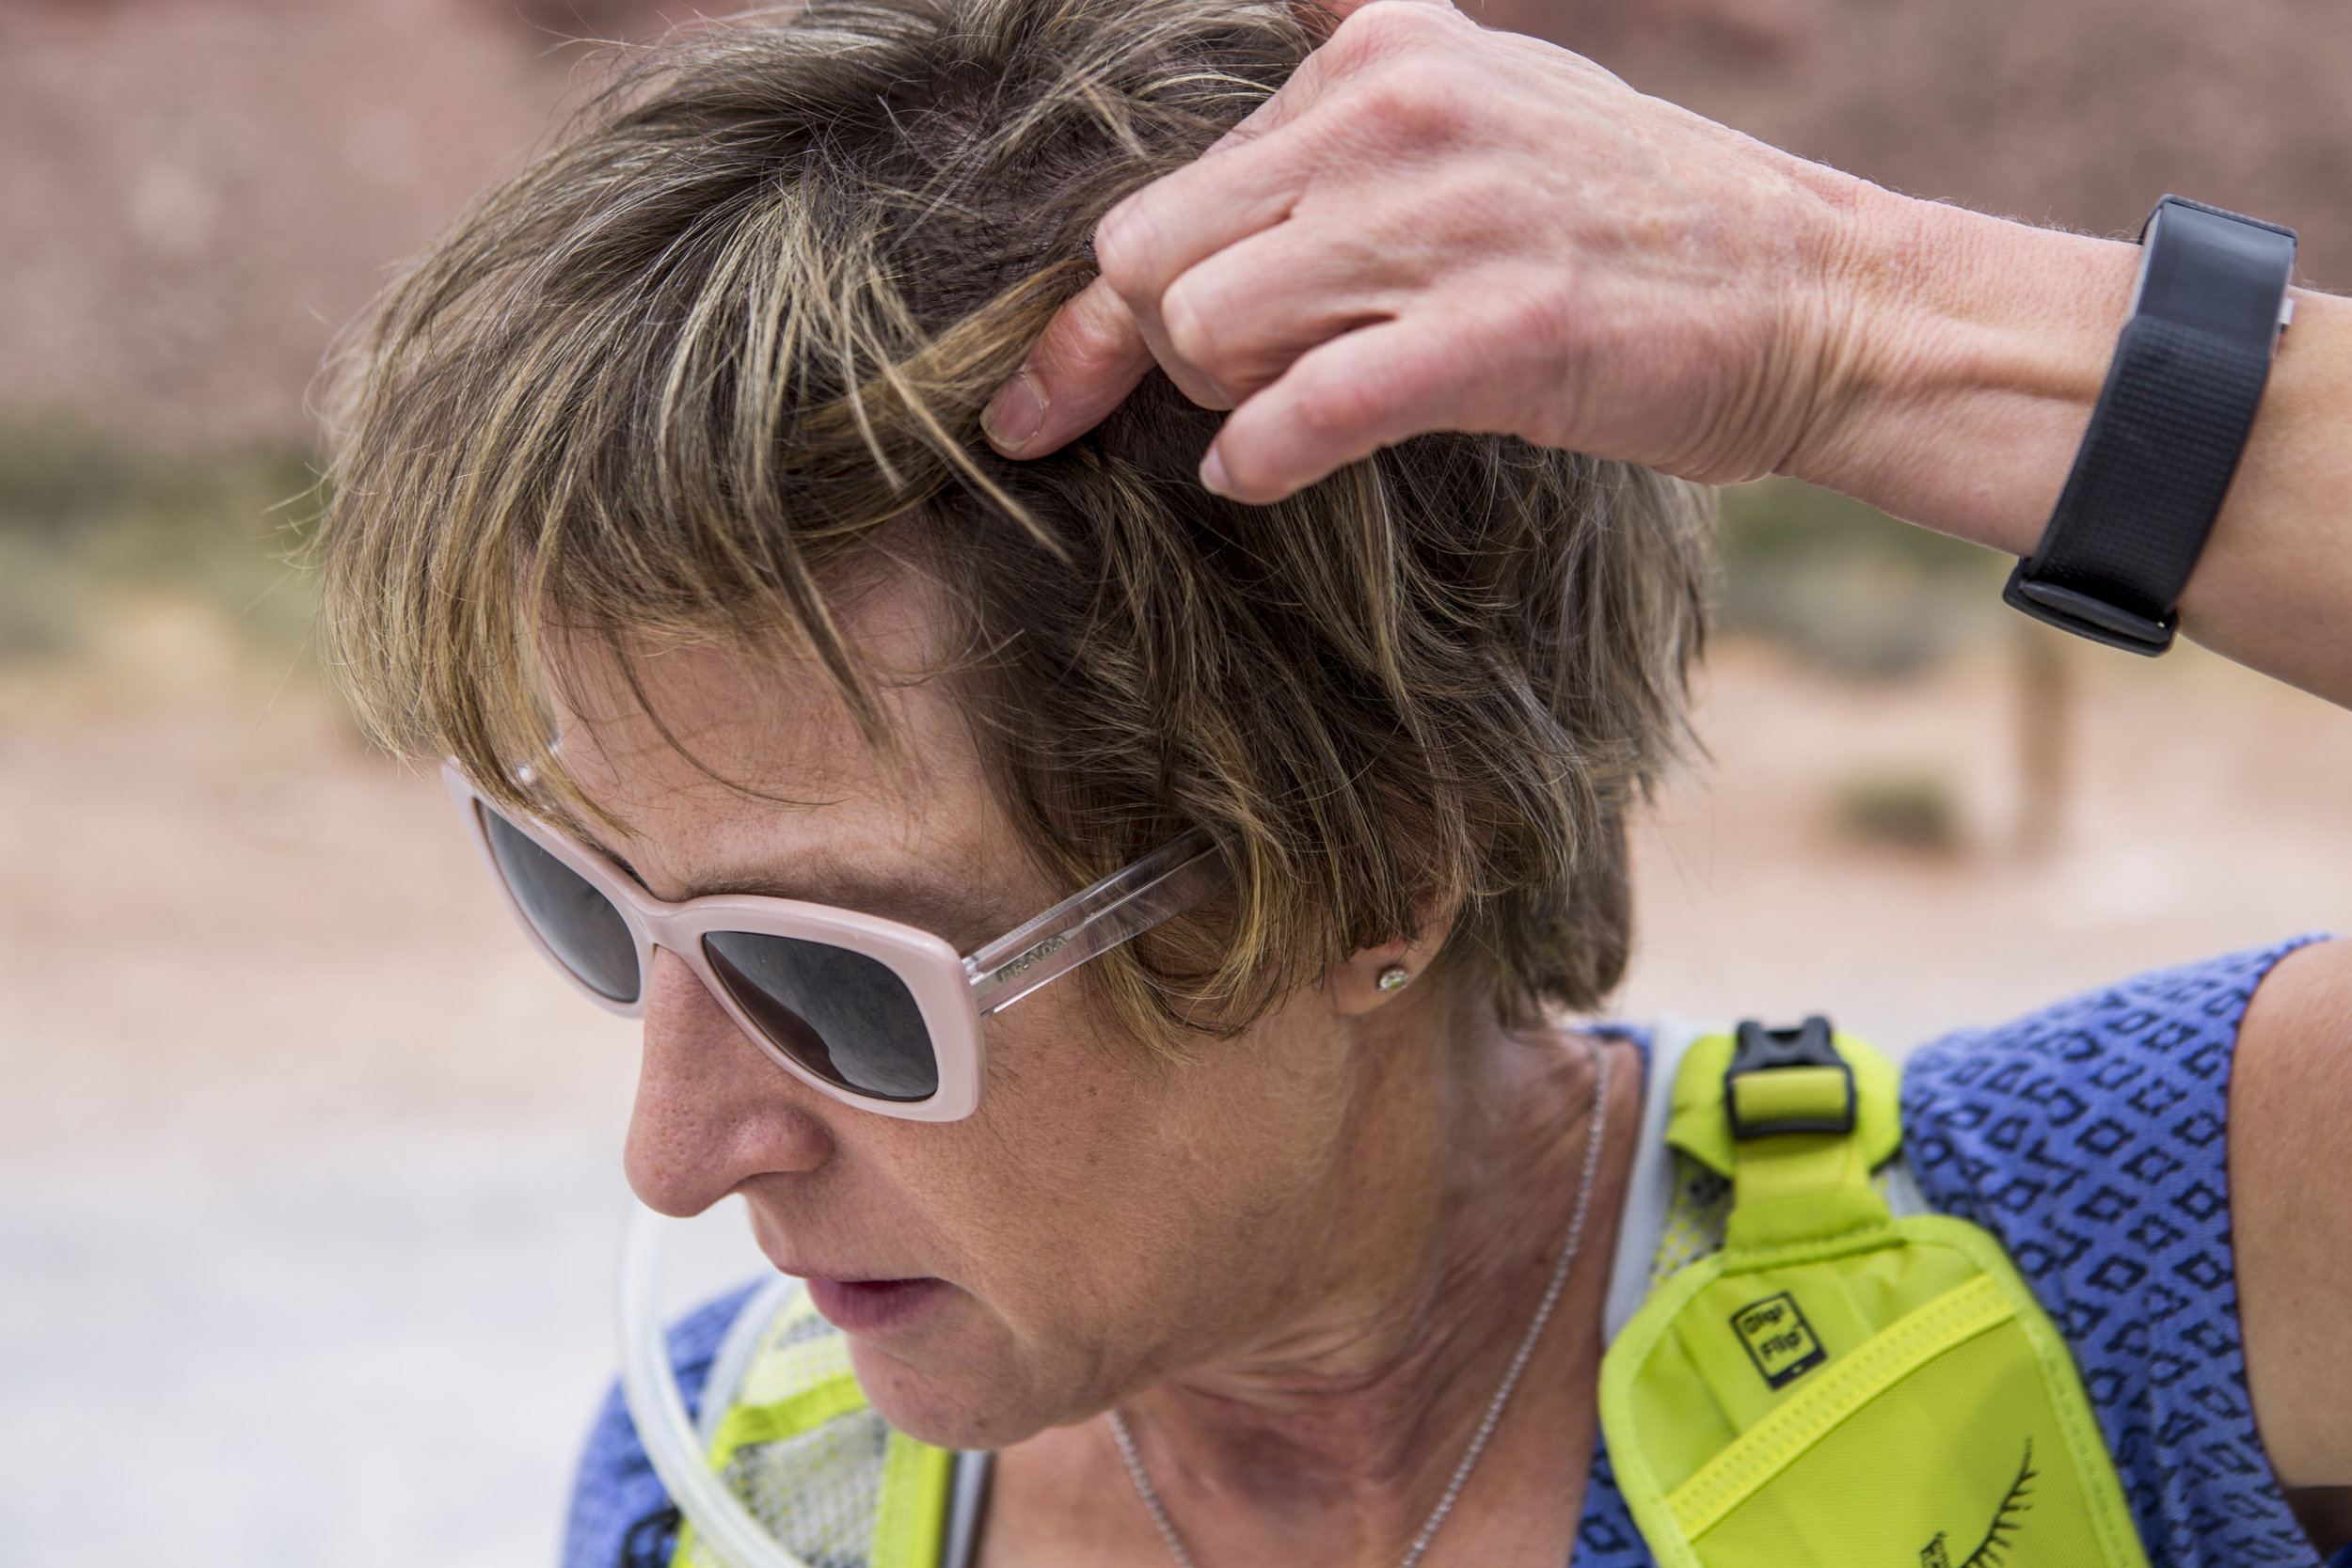  Candace Kawatsu shows where an incision was made in her head in Calico Basin on Thursday, May 18, 2017. Patrick Connolly Las Vegas Review-Journal @PConnPie 